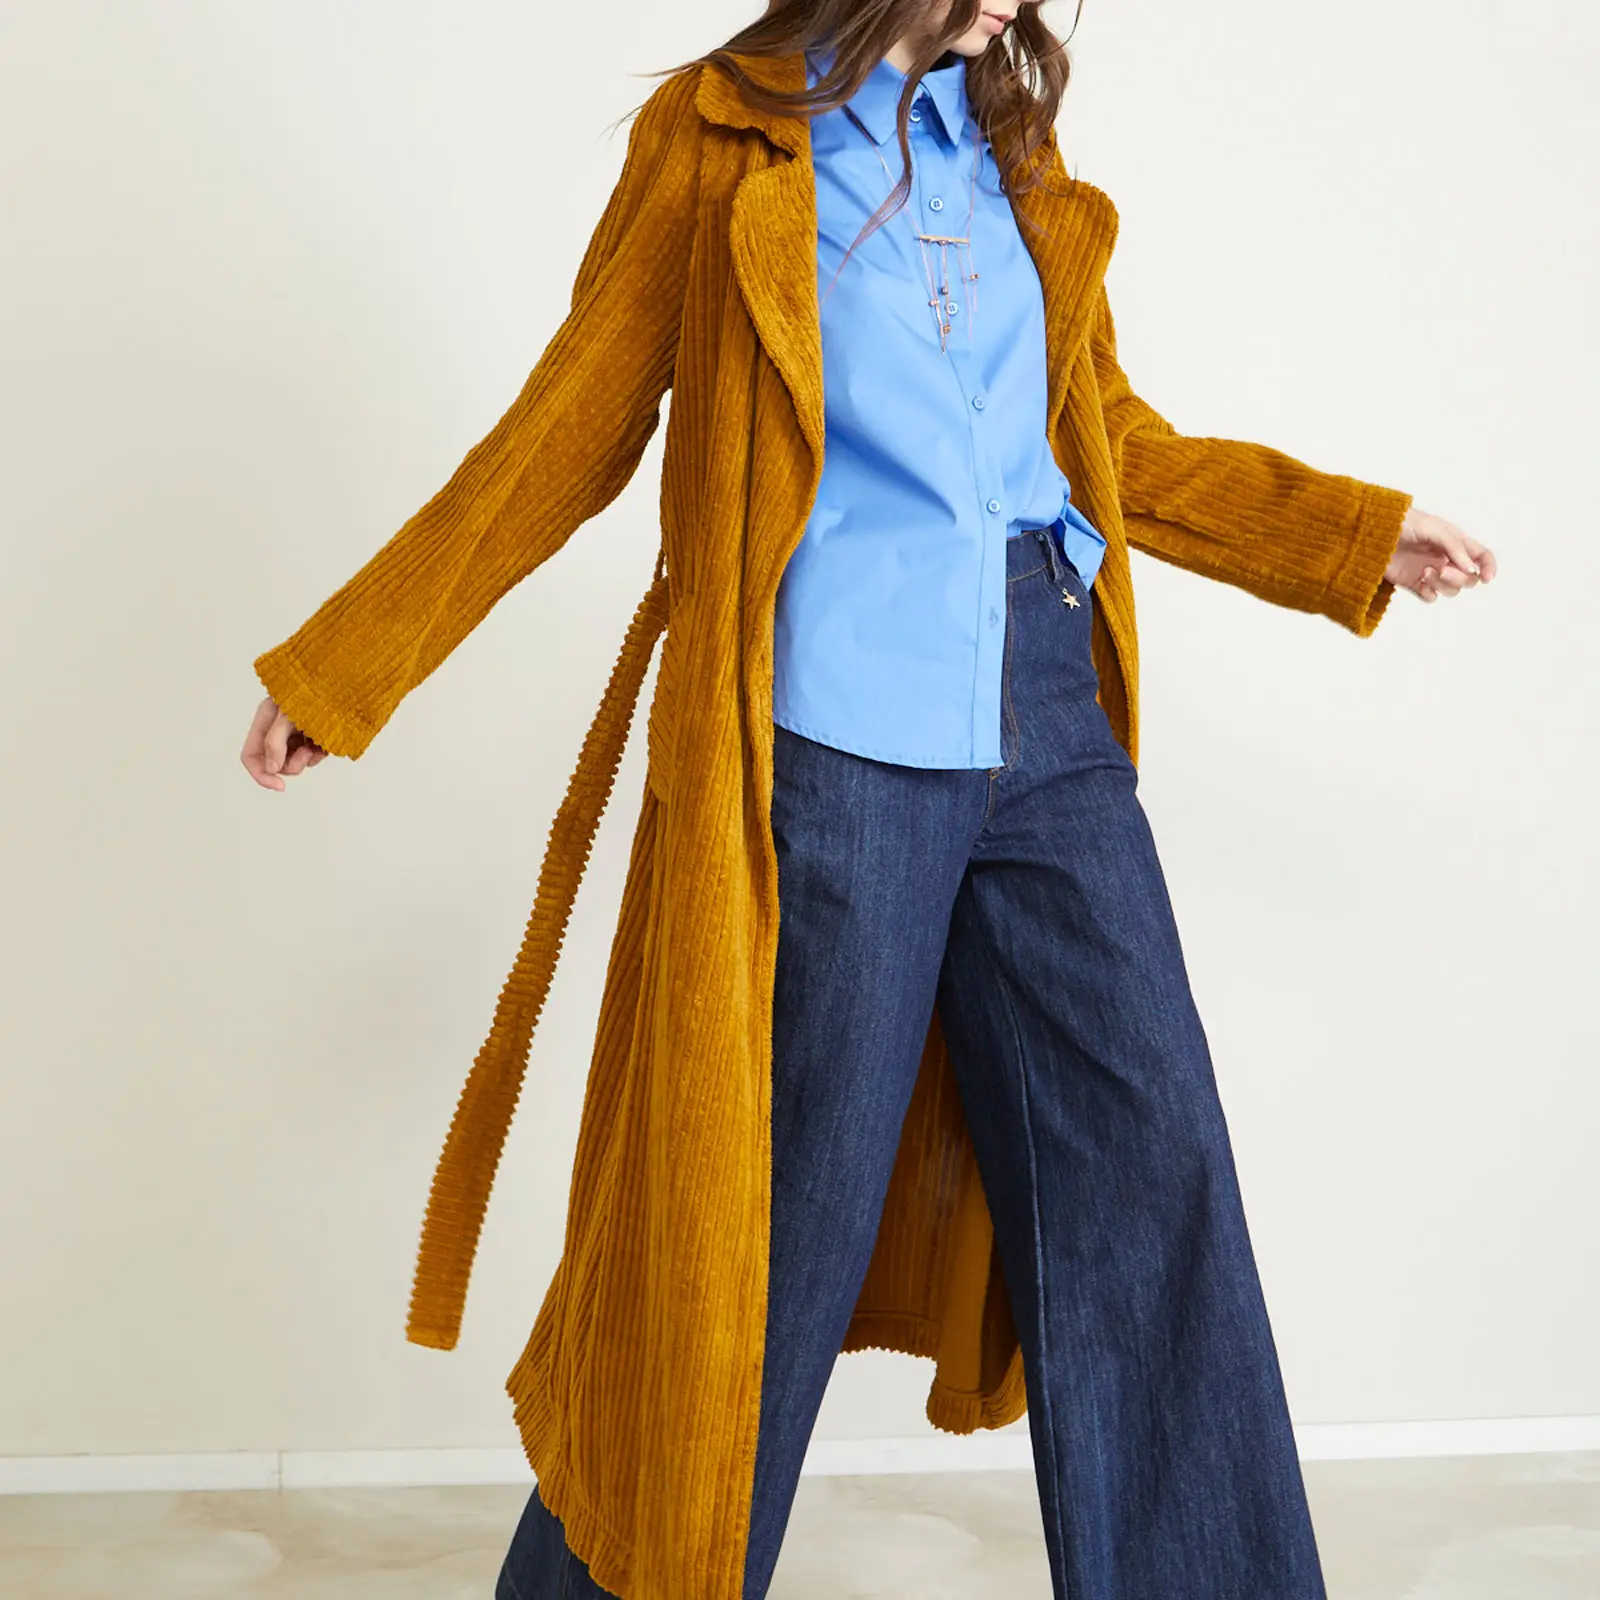 Made in Italy yellow velvet long coat for ladies with lapel neck with sash for casual day ready to wear